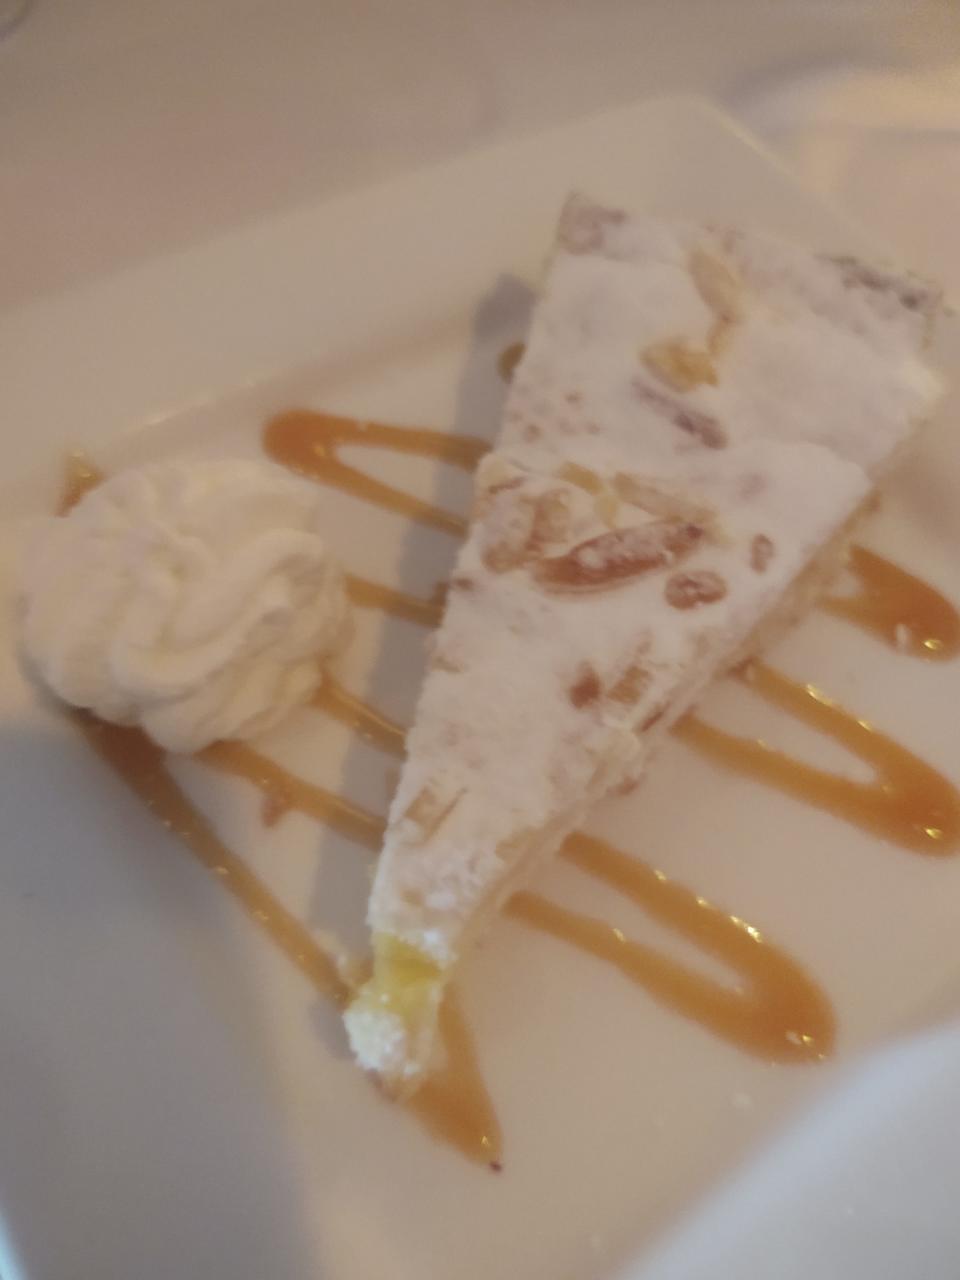 At Trattoria Dario in Vero Beach, the nonna cake has a layer of pastry, a layer of lemony filling and another layer of pastry with whipped cream and nuts.